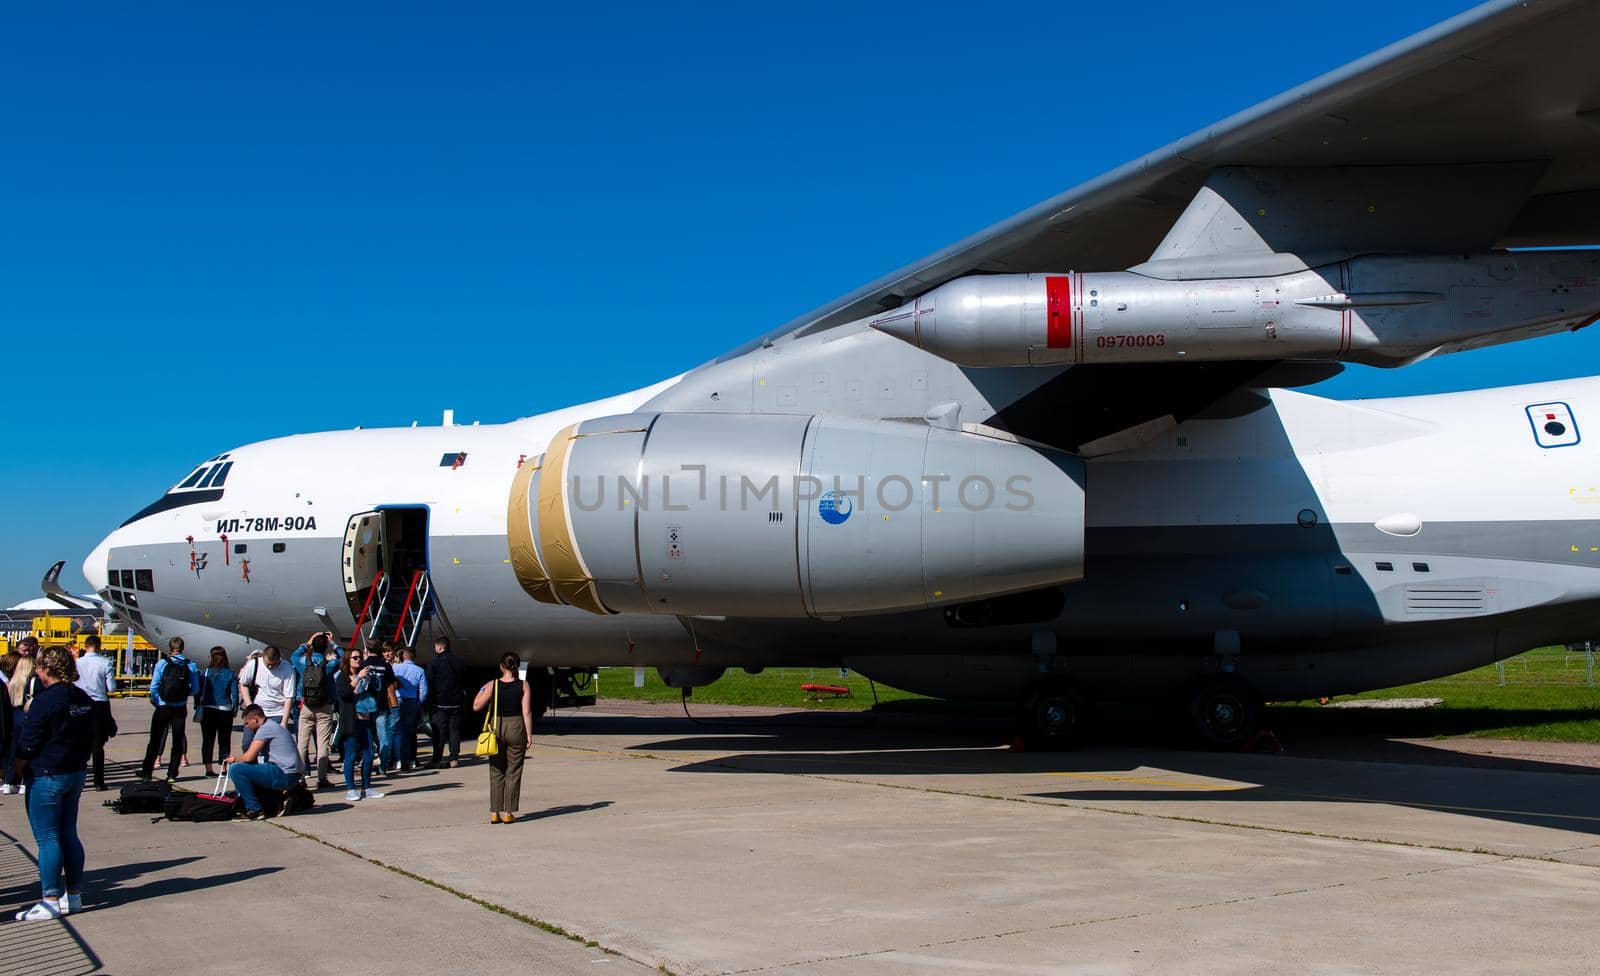 August 30, 2019, Moscow region, Russia. Ilyushin Il-78 refueling aircraft at the International Aviation and Space Salon.